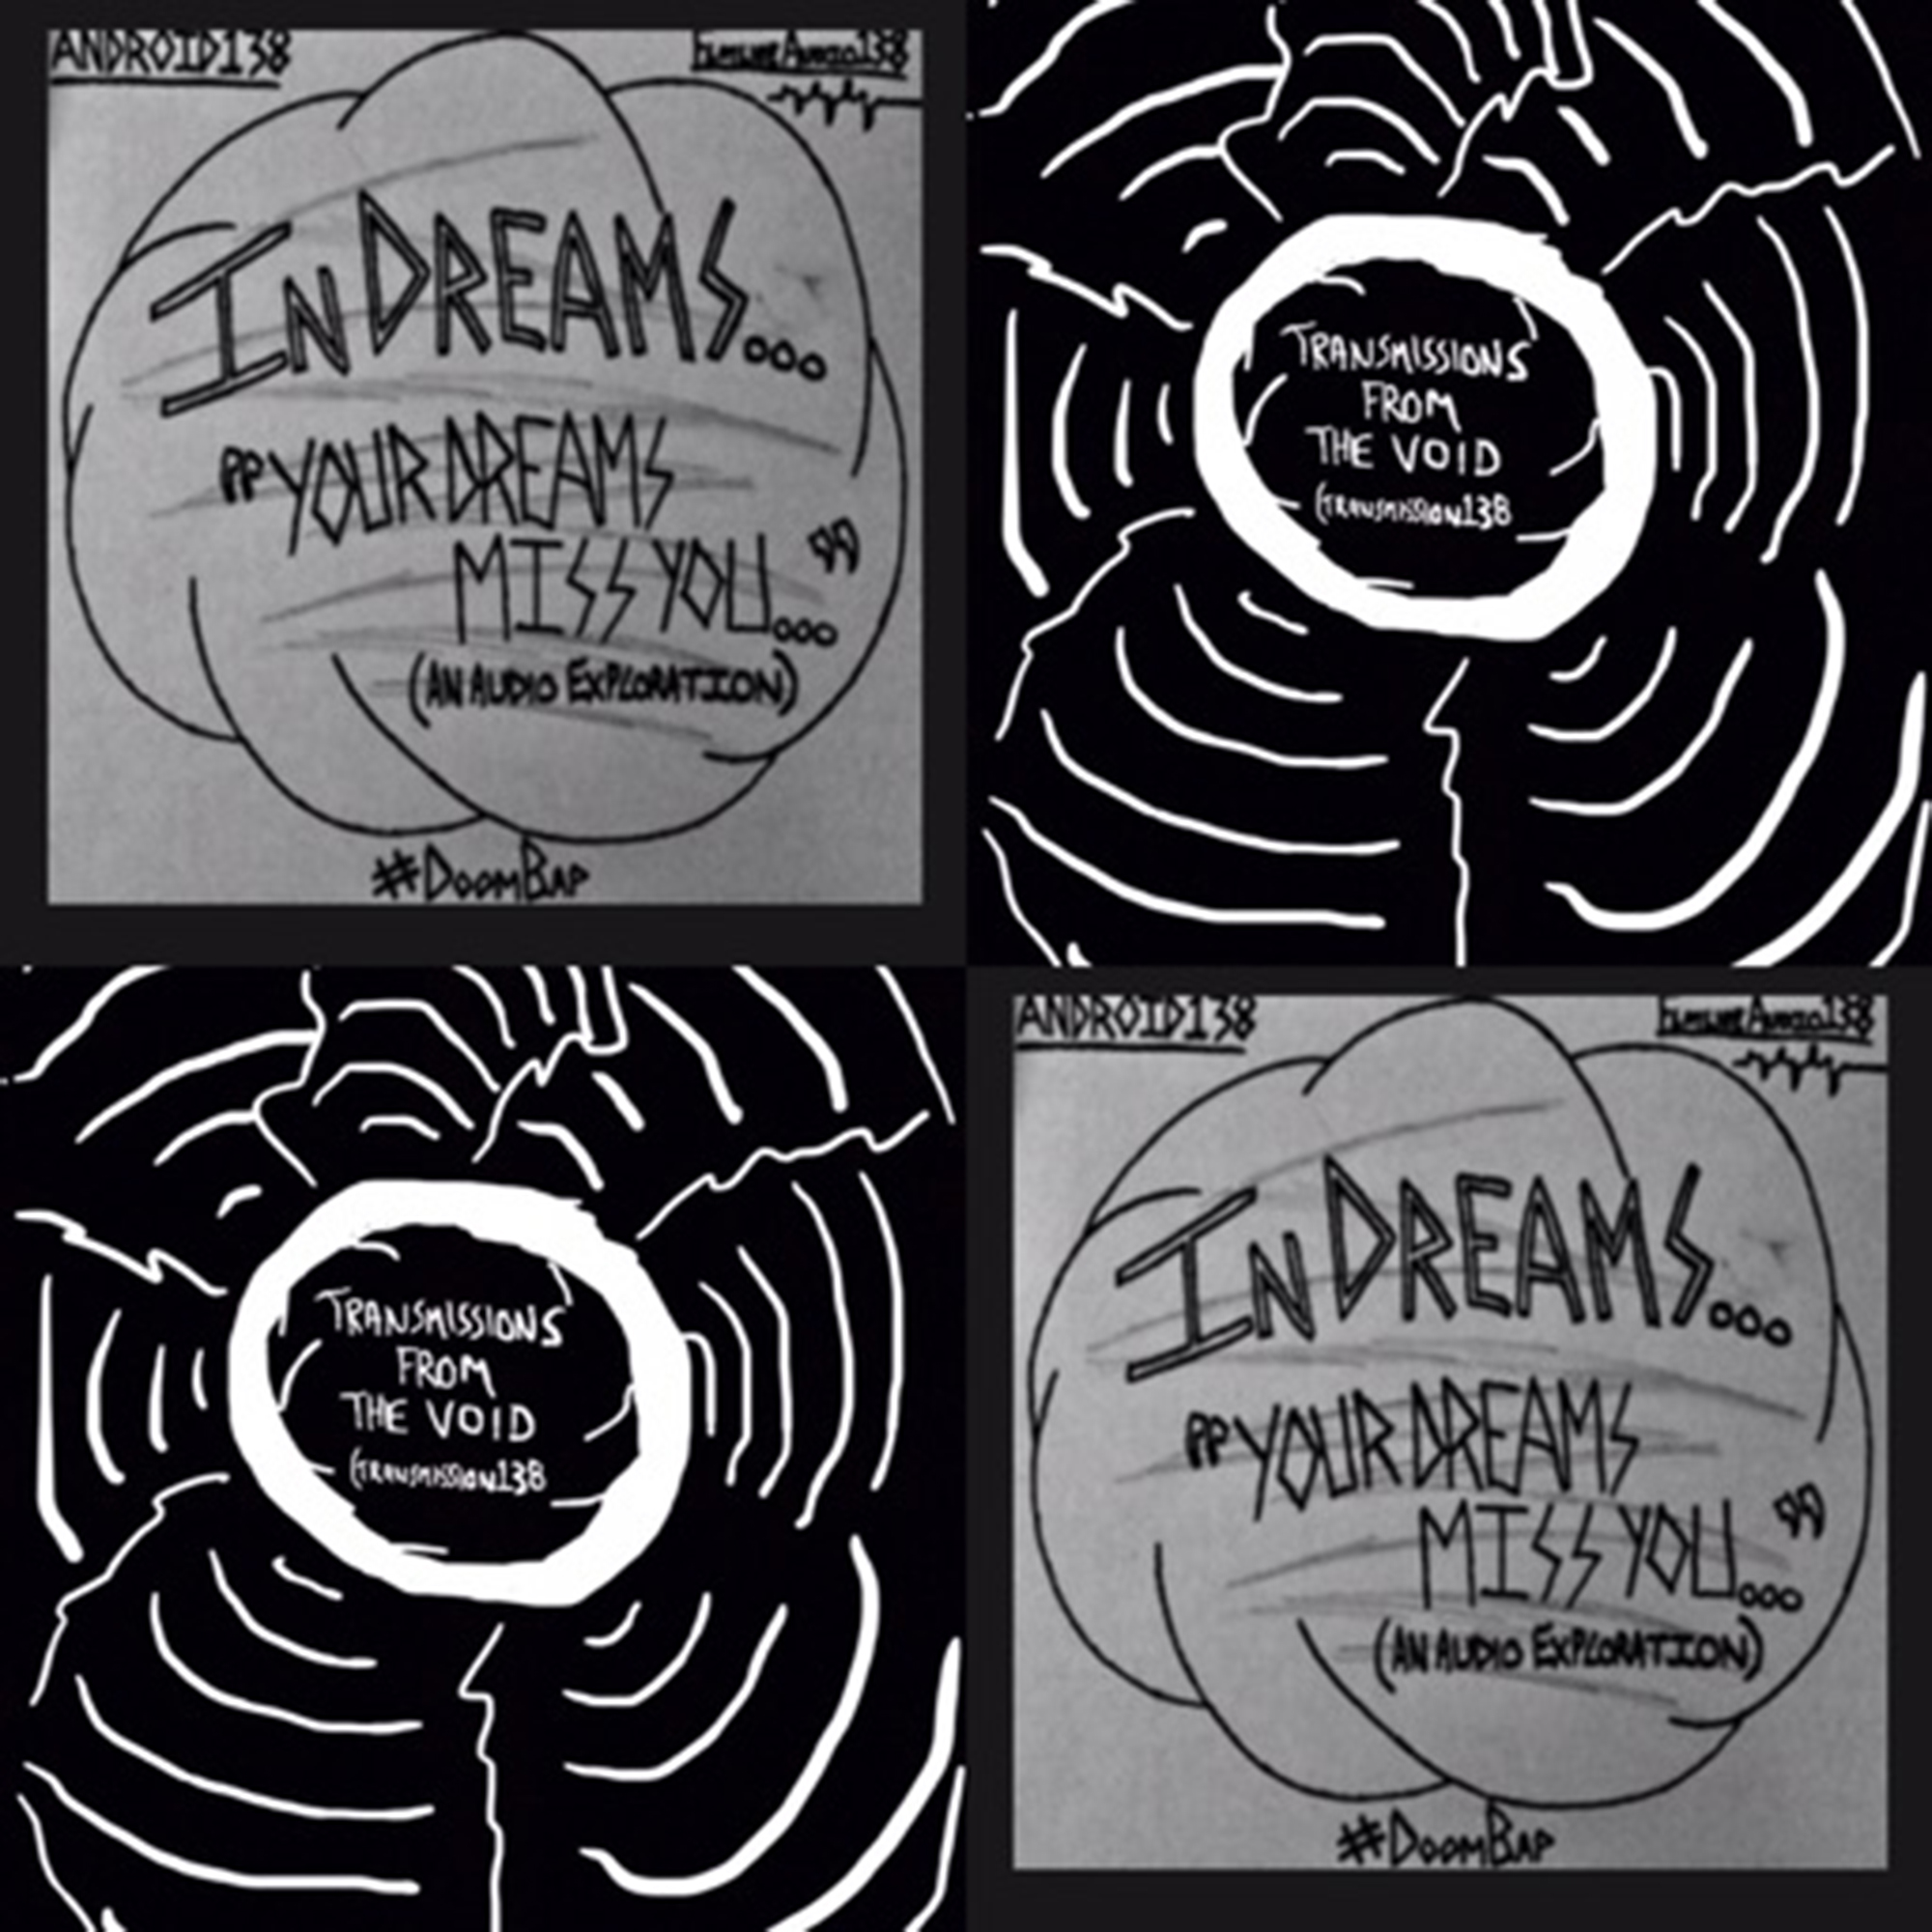 InDreams- “YourDreamsMissYou” (AnAudioExploration) and "TransmissionsFromTheVoid" (Transmission138)